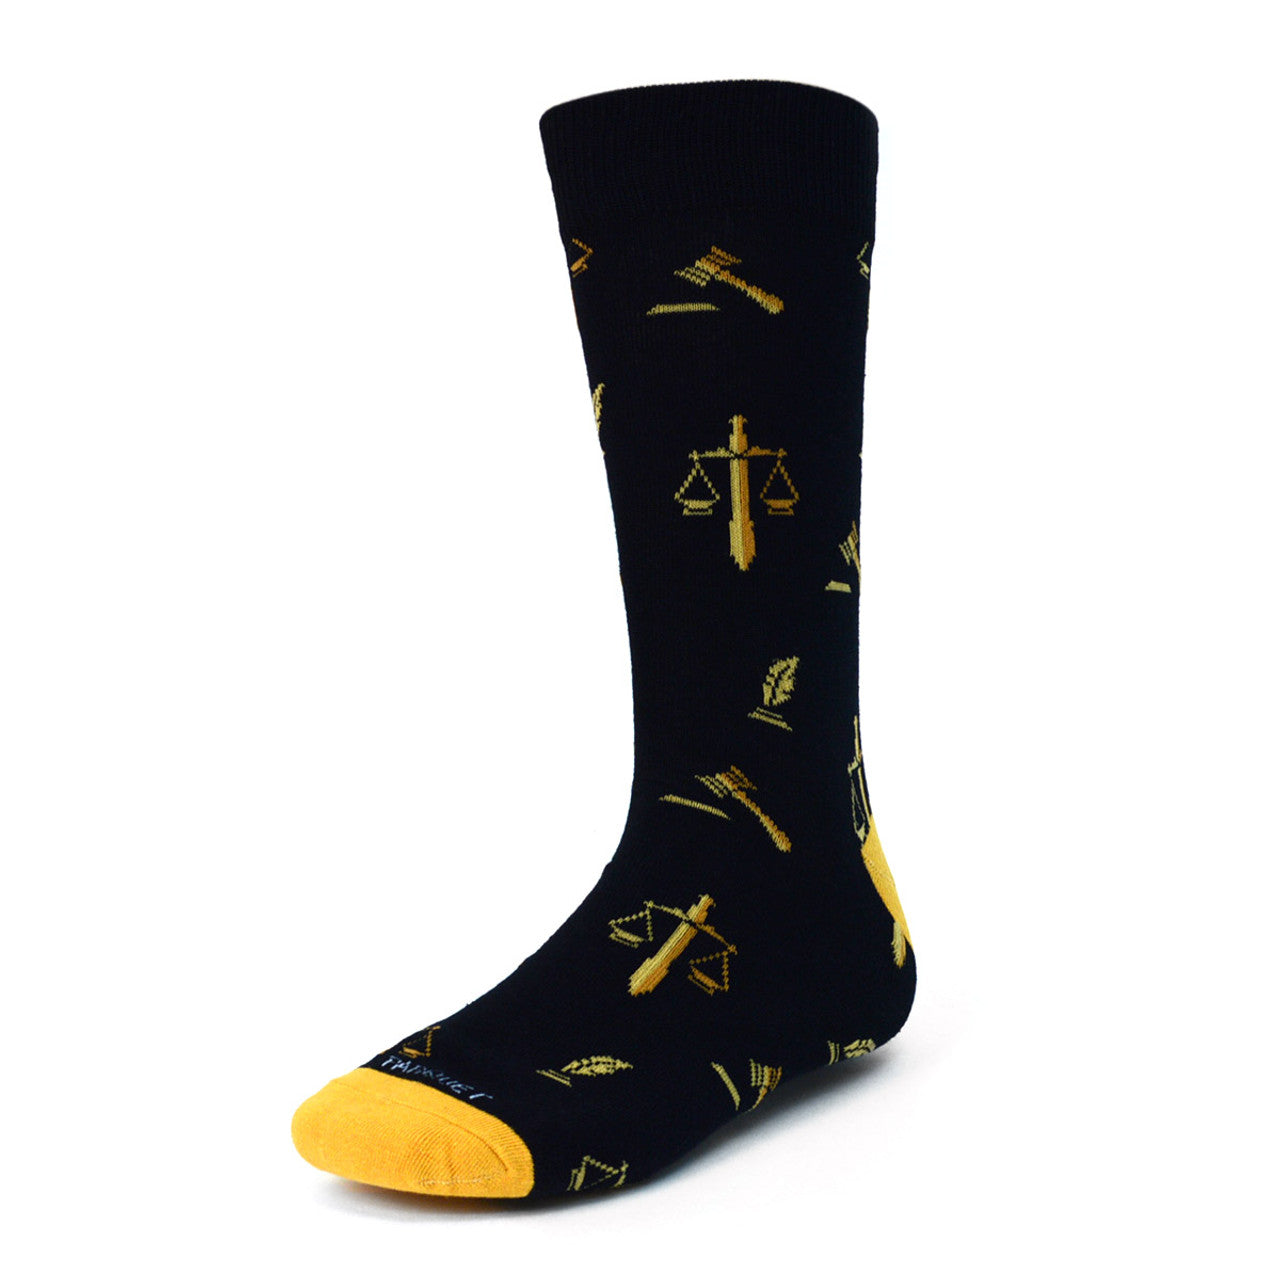 Men's Lawyer Crew Socks - Scale of Justice Quill Gavel Black and Gold is